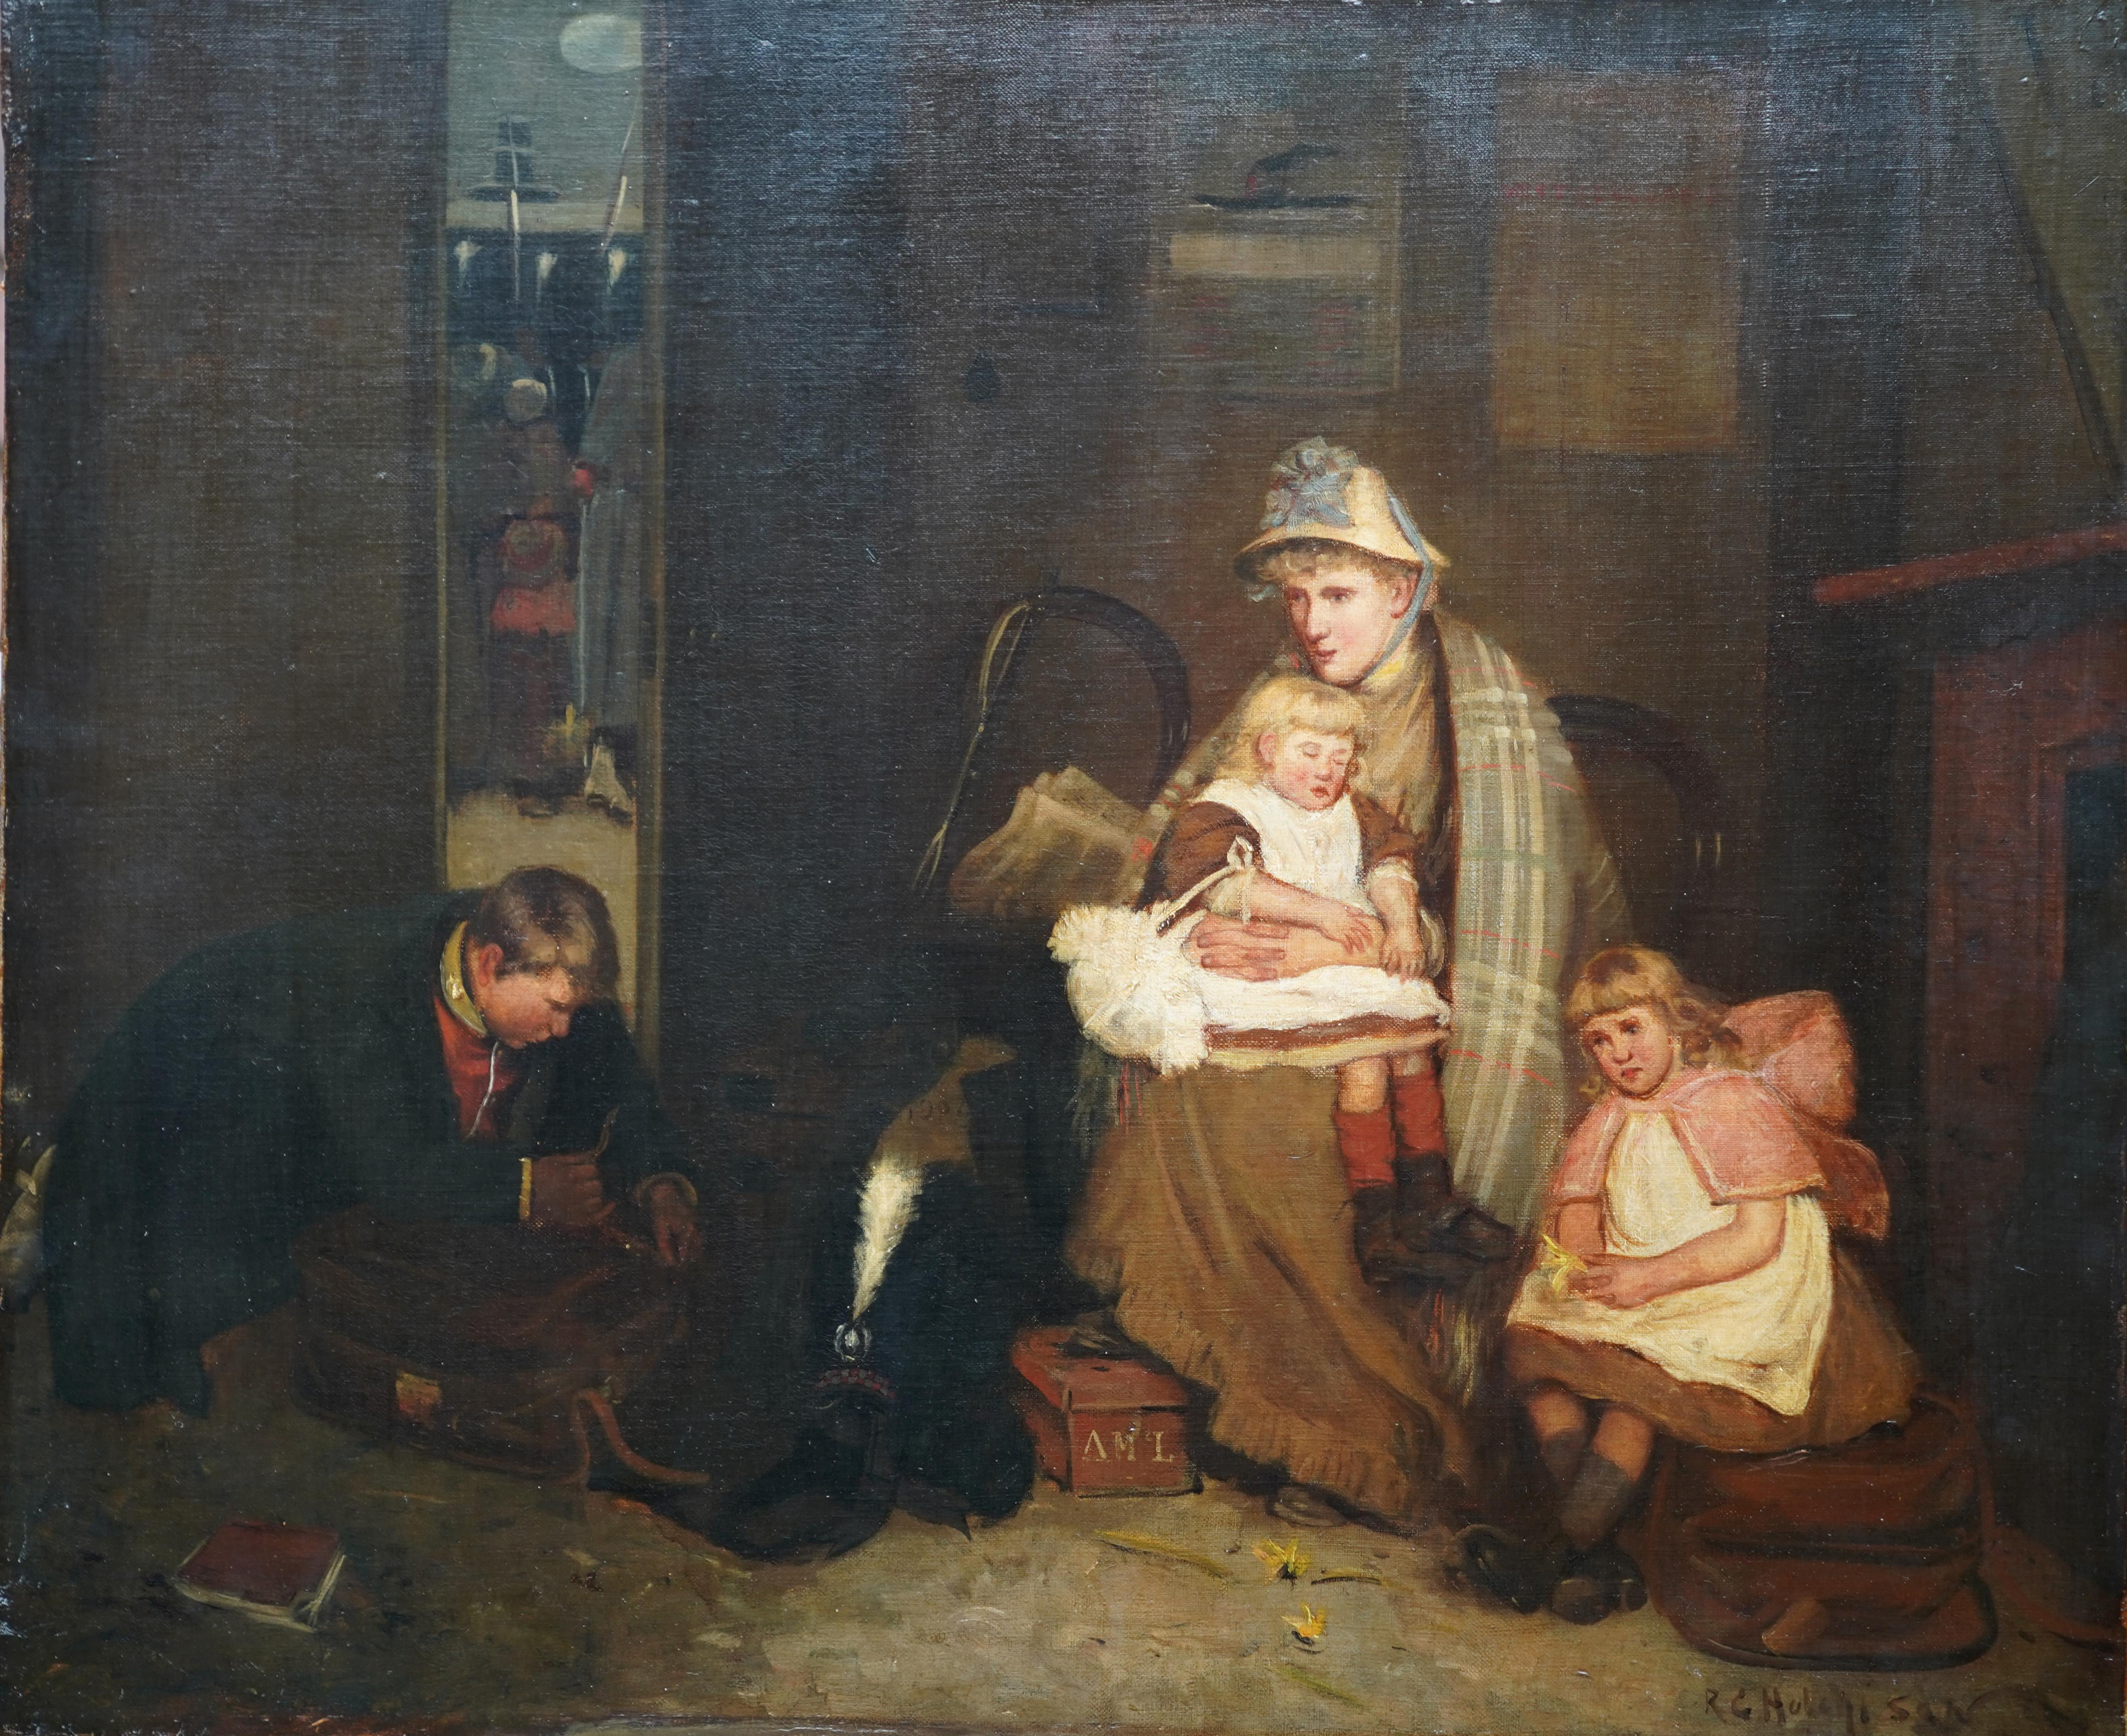 The Soldier's Farewell - Scottish Victorian art Interior portrait oil painting - Painting by Robert Gemmell Hutchison